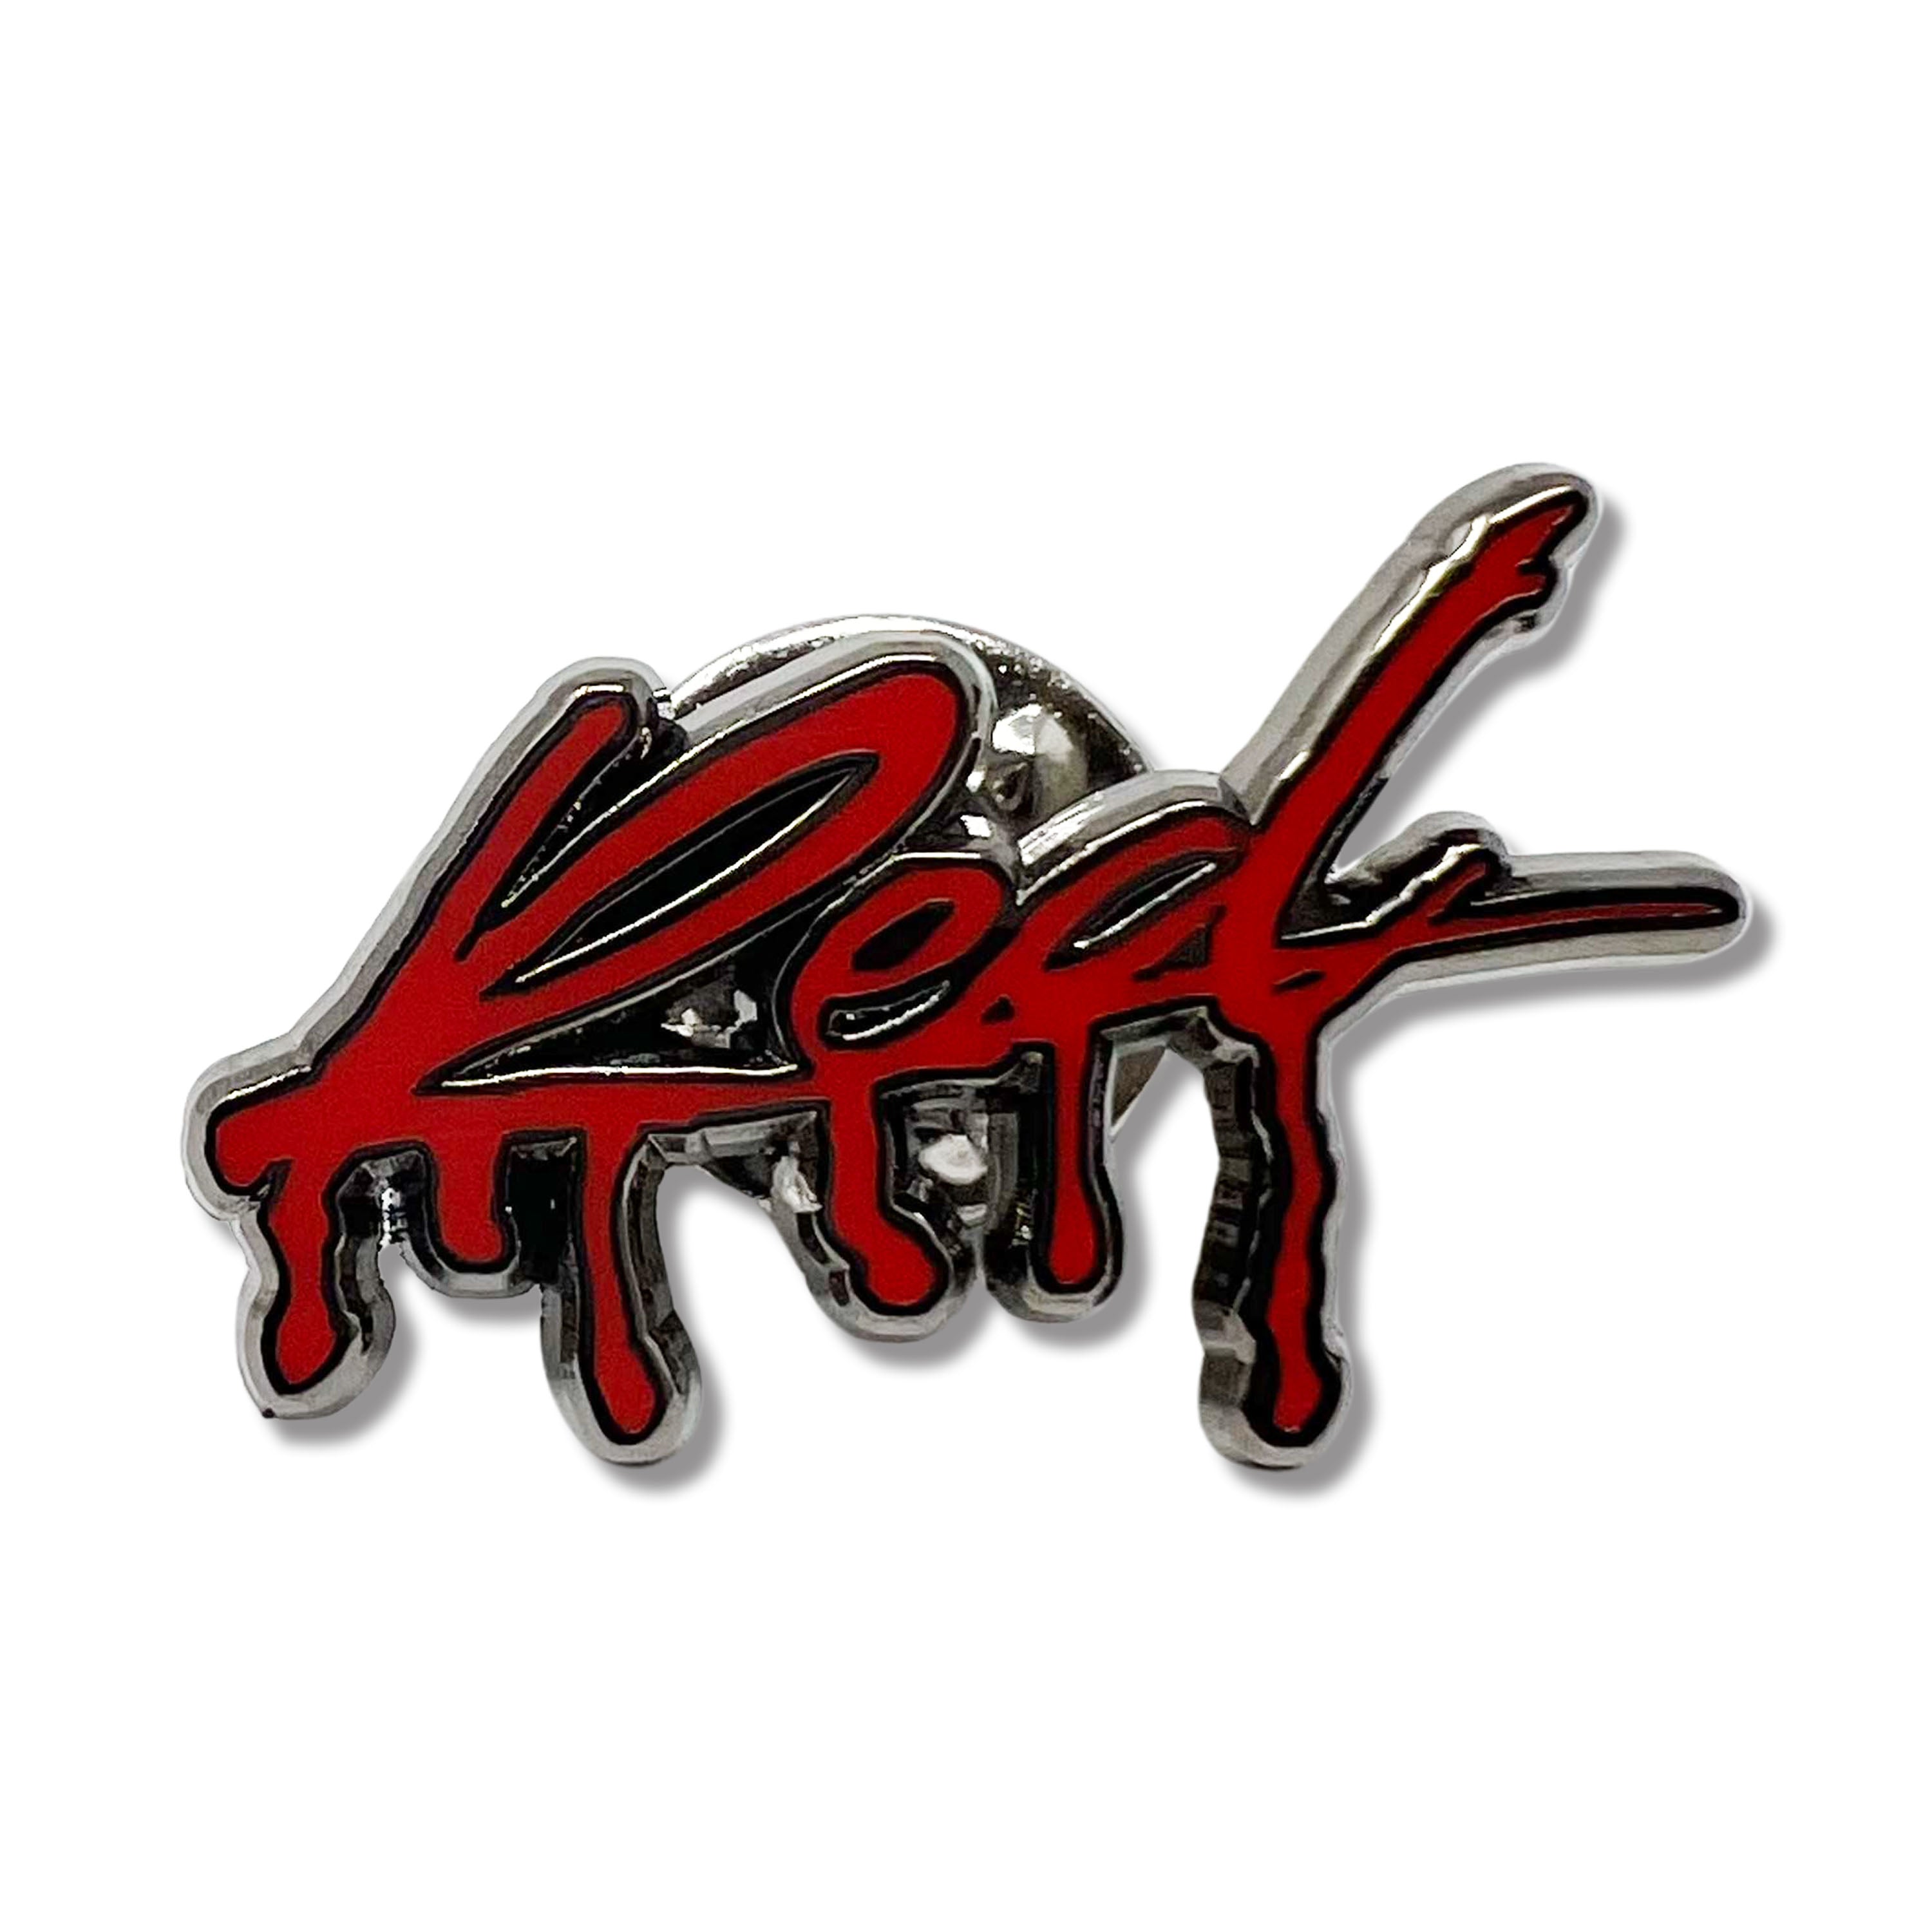 Red Hat Pin